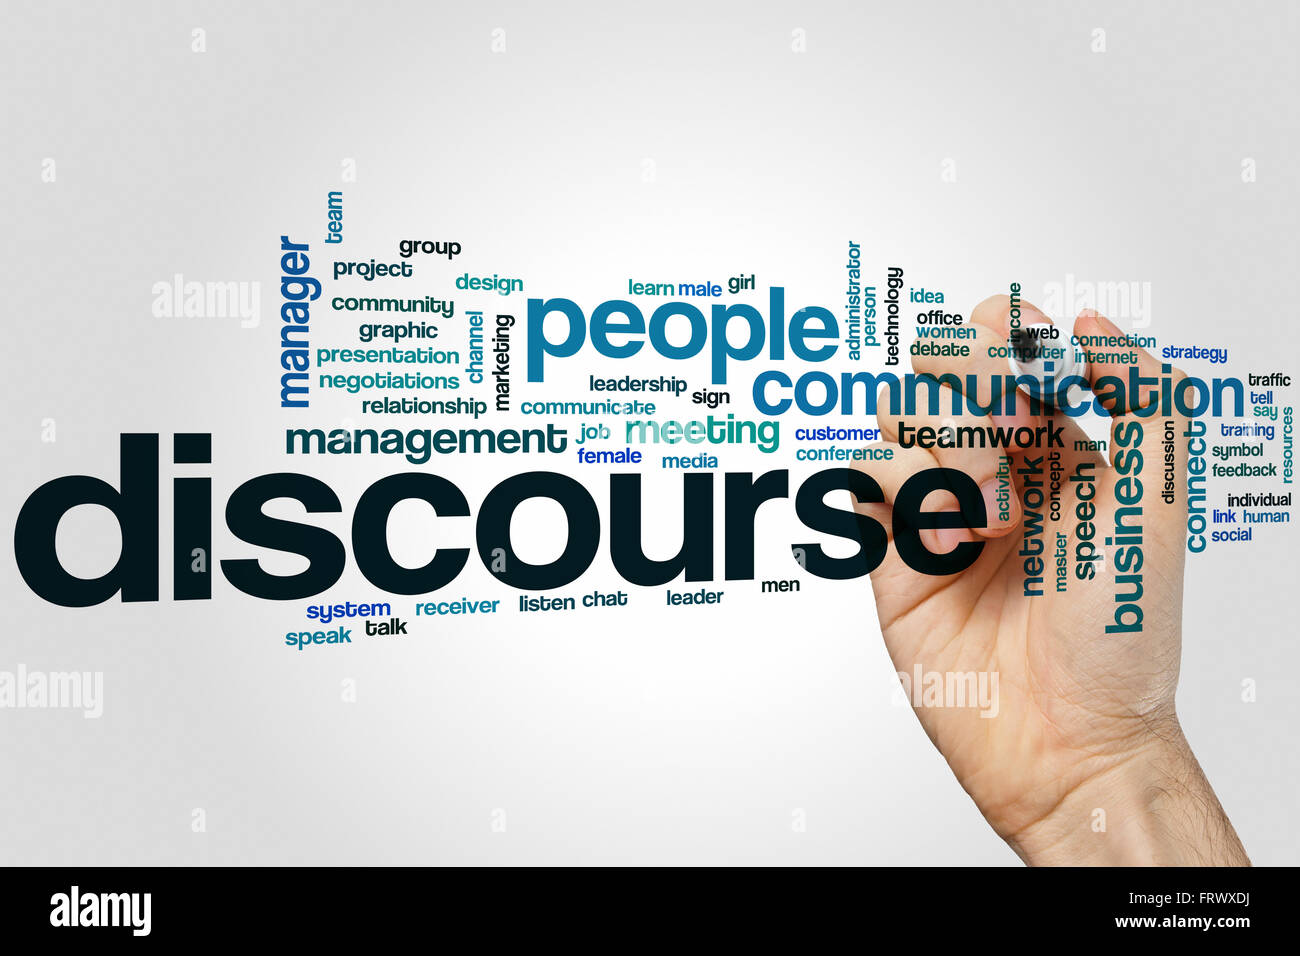 Discourse word cloud concept with communication talk related tags Stock Photo